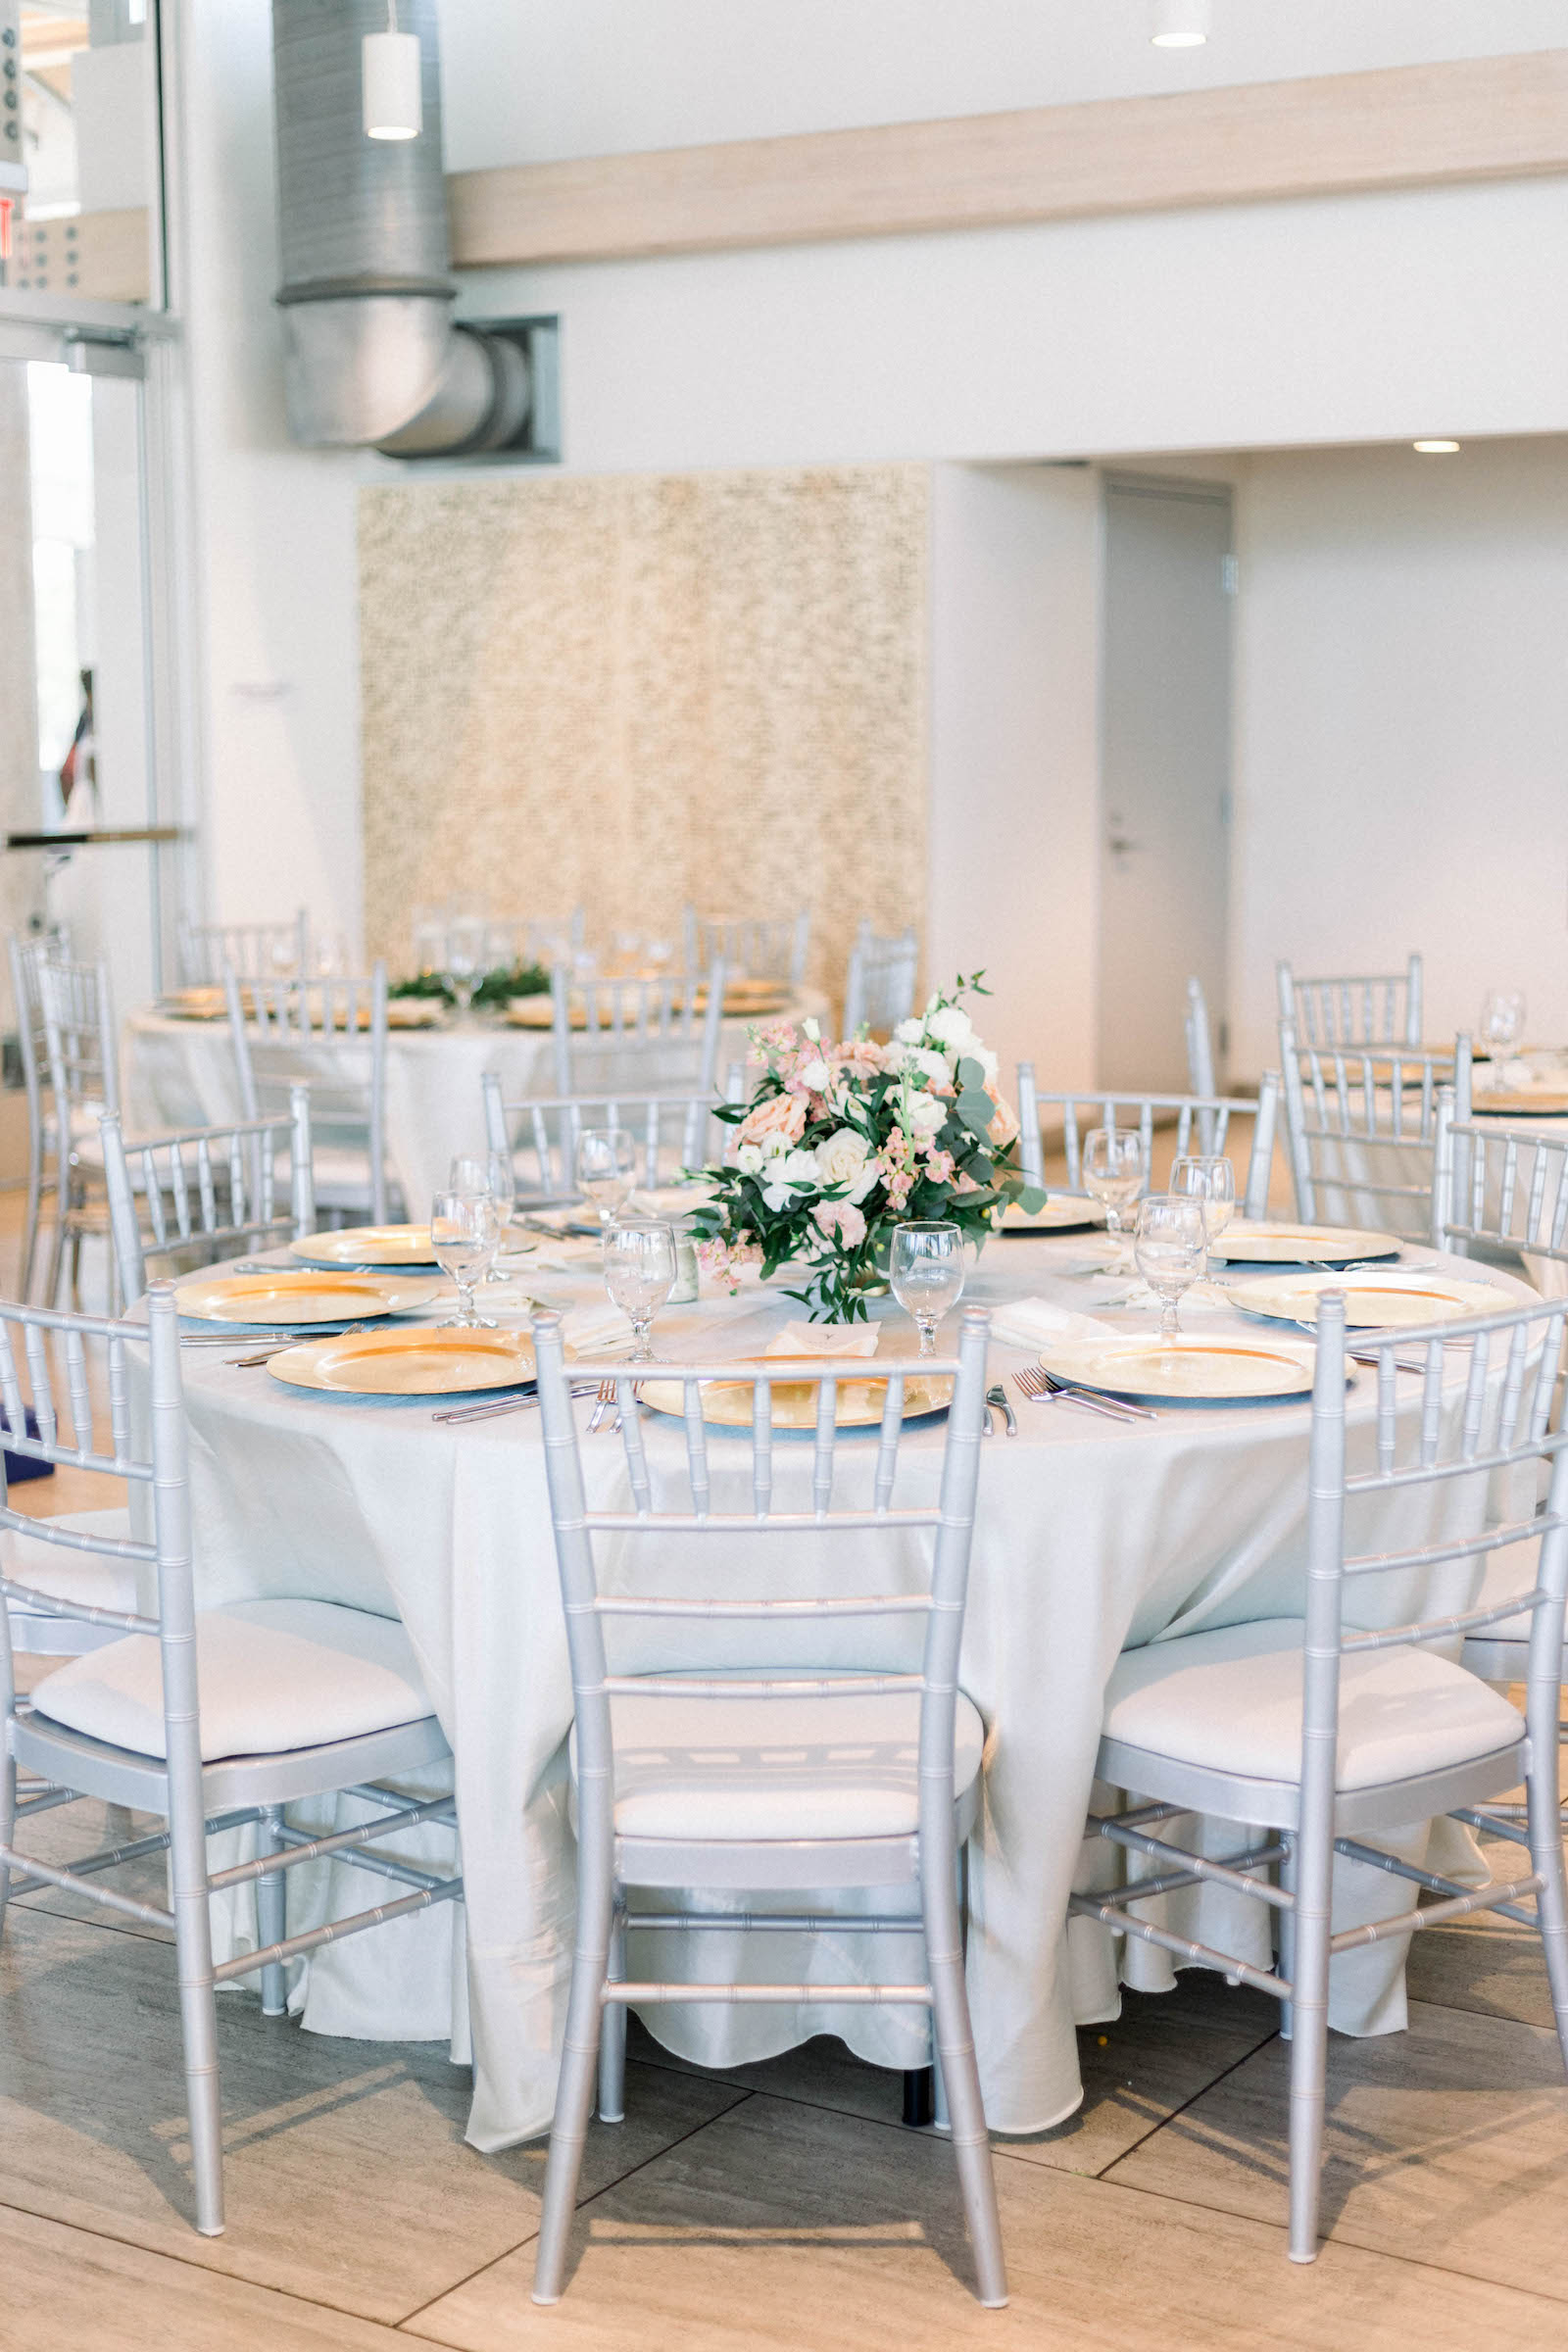 Blush and White Floral and Greenery Centerpiece on Round Table with White Linen and White Chairs | Tampa Rentals Kate Ryan Event Rentals | | Caterer Elite Events Catering